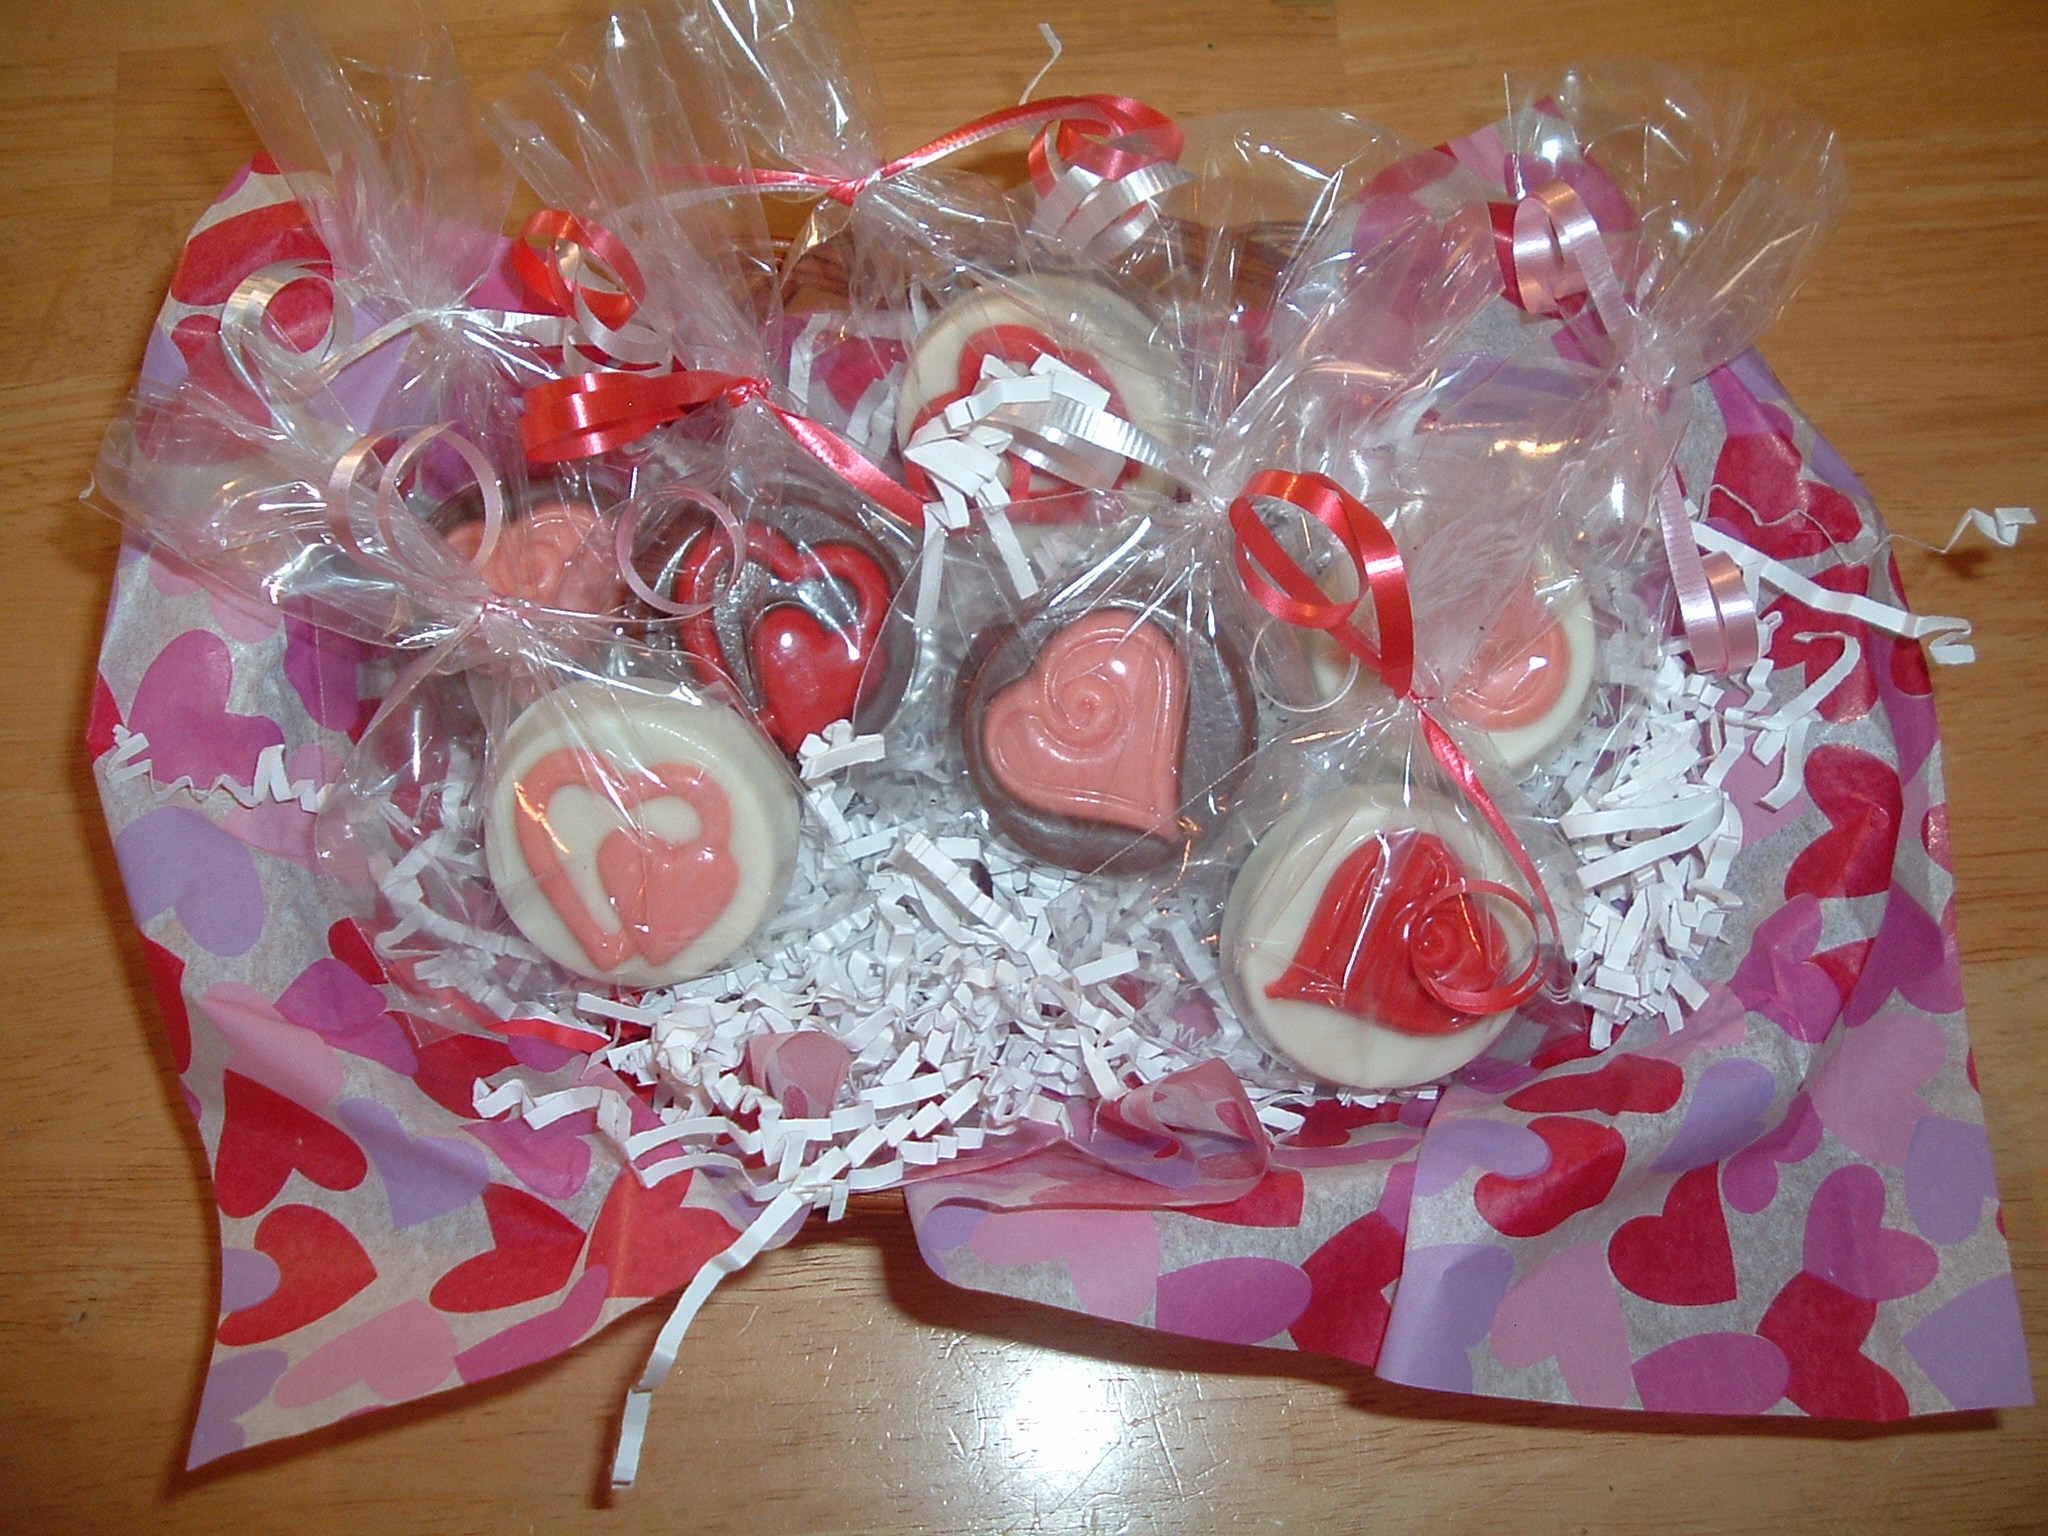 Valentines Hearts in Chocolate Oreo Cookie Basket 8